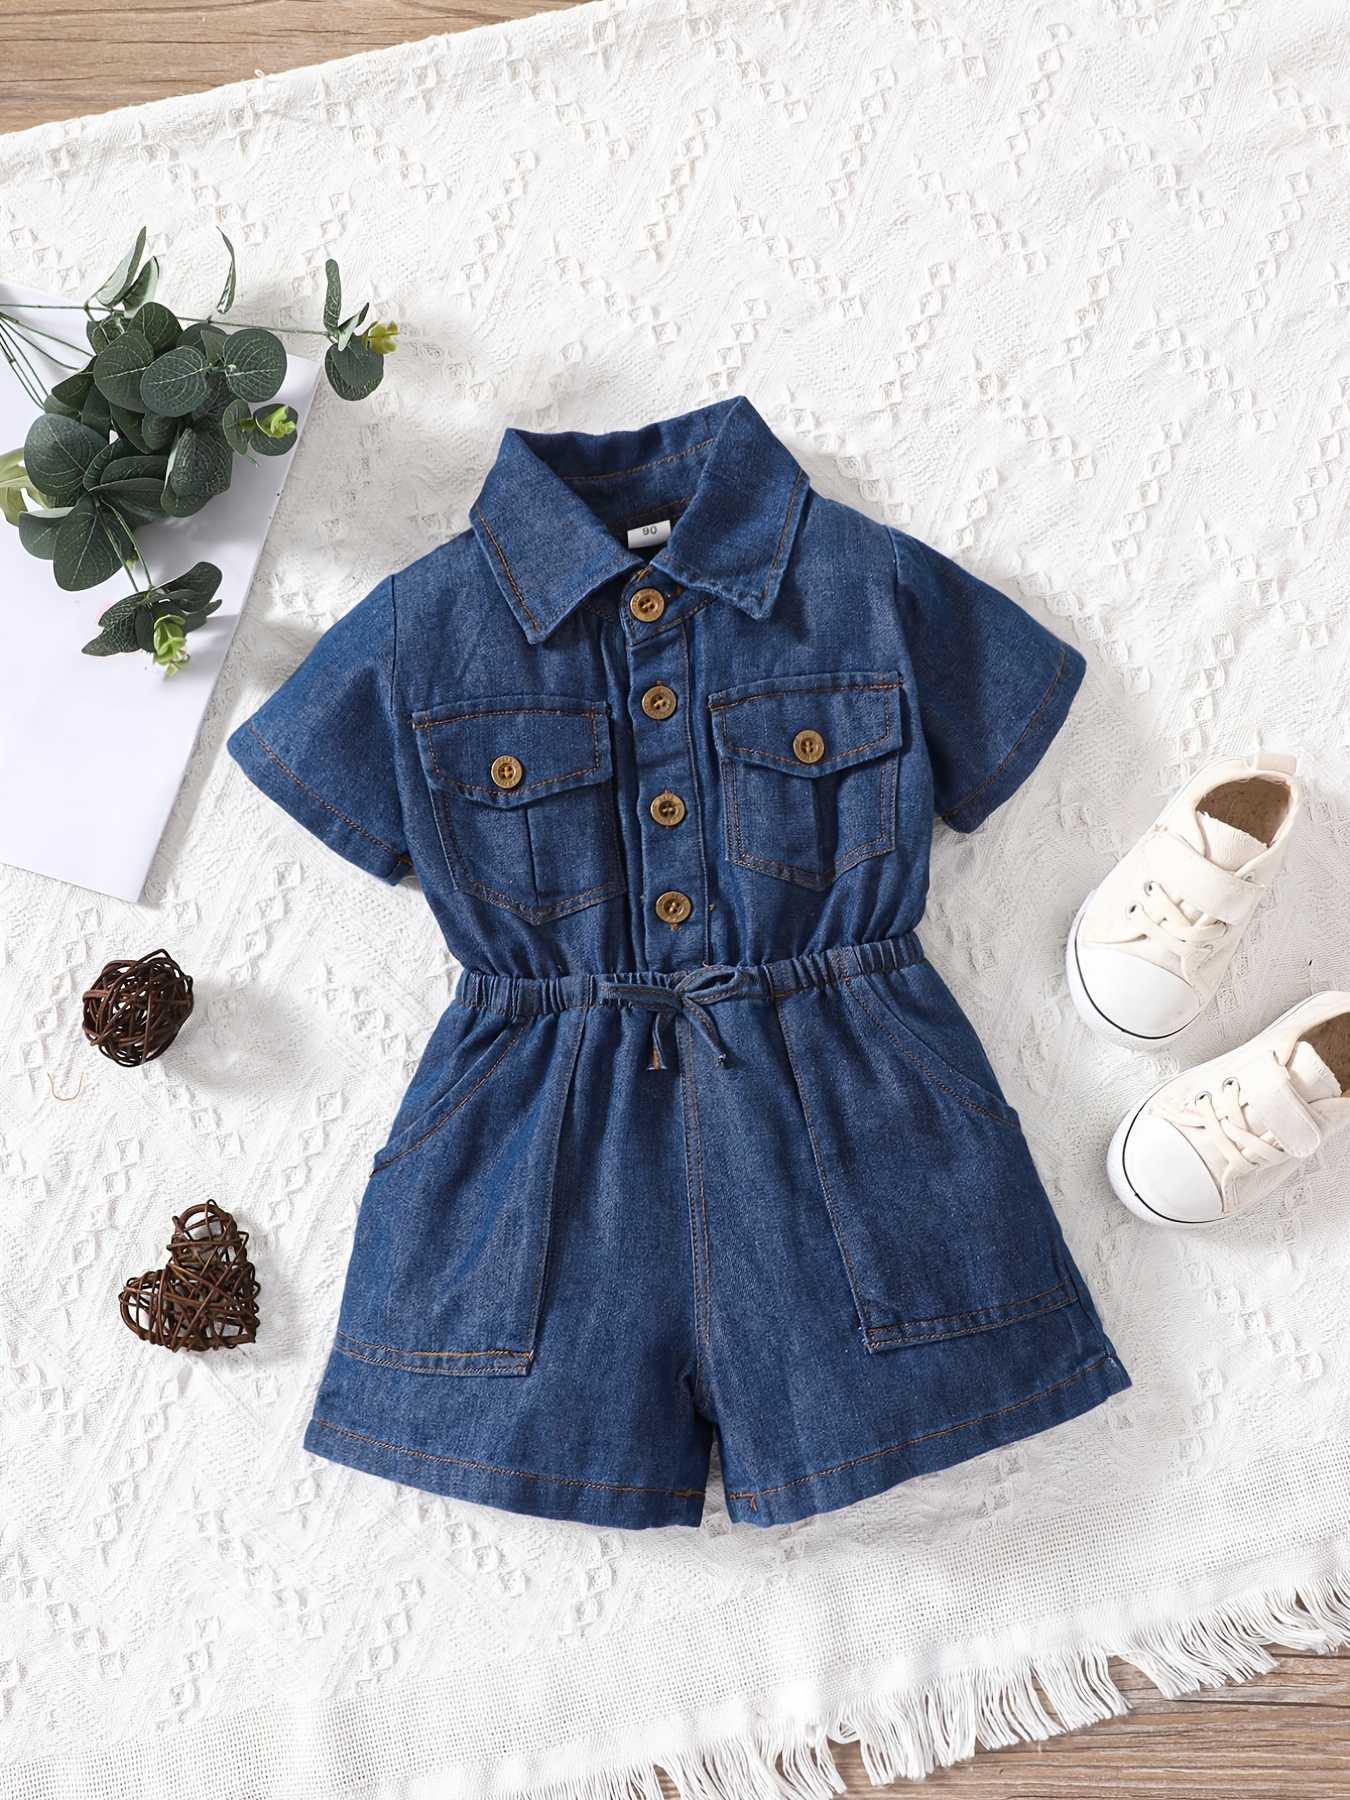 Fashion Women Denim Jumpsuit Romper Shorts Casual | Denim Playsuit Outfit  Clothing - Rompers&playsuits - Aliexpress